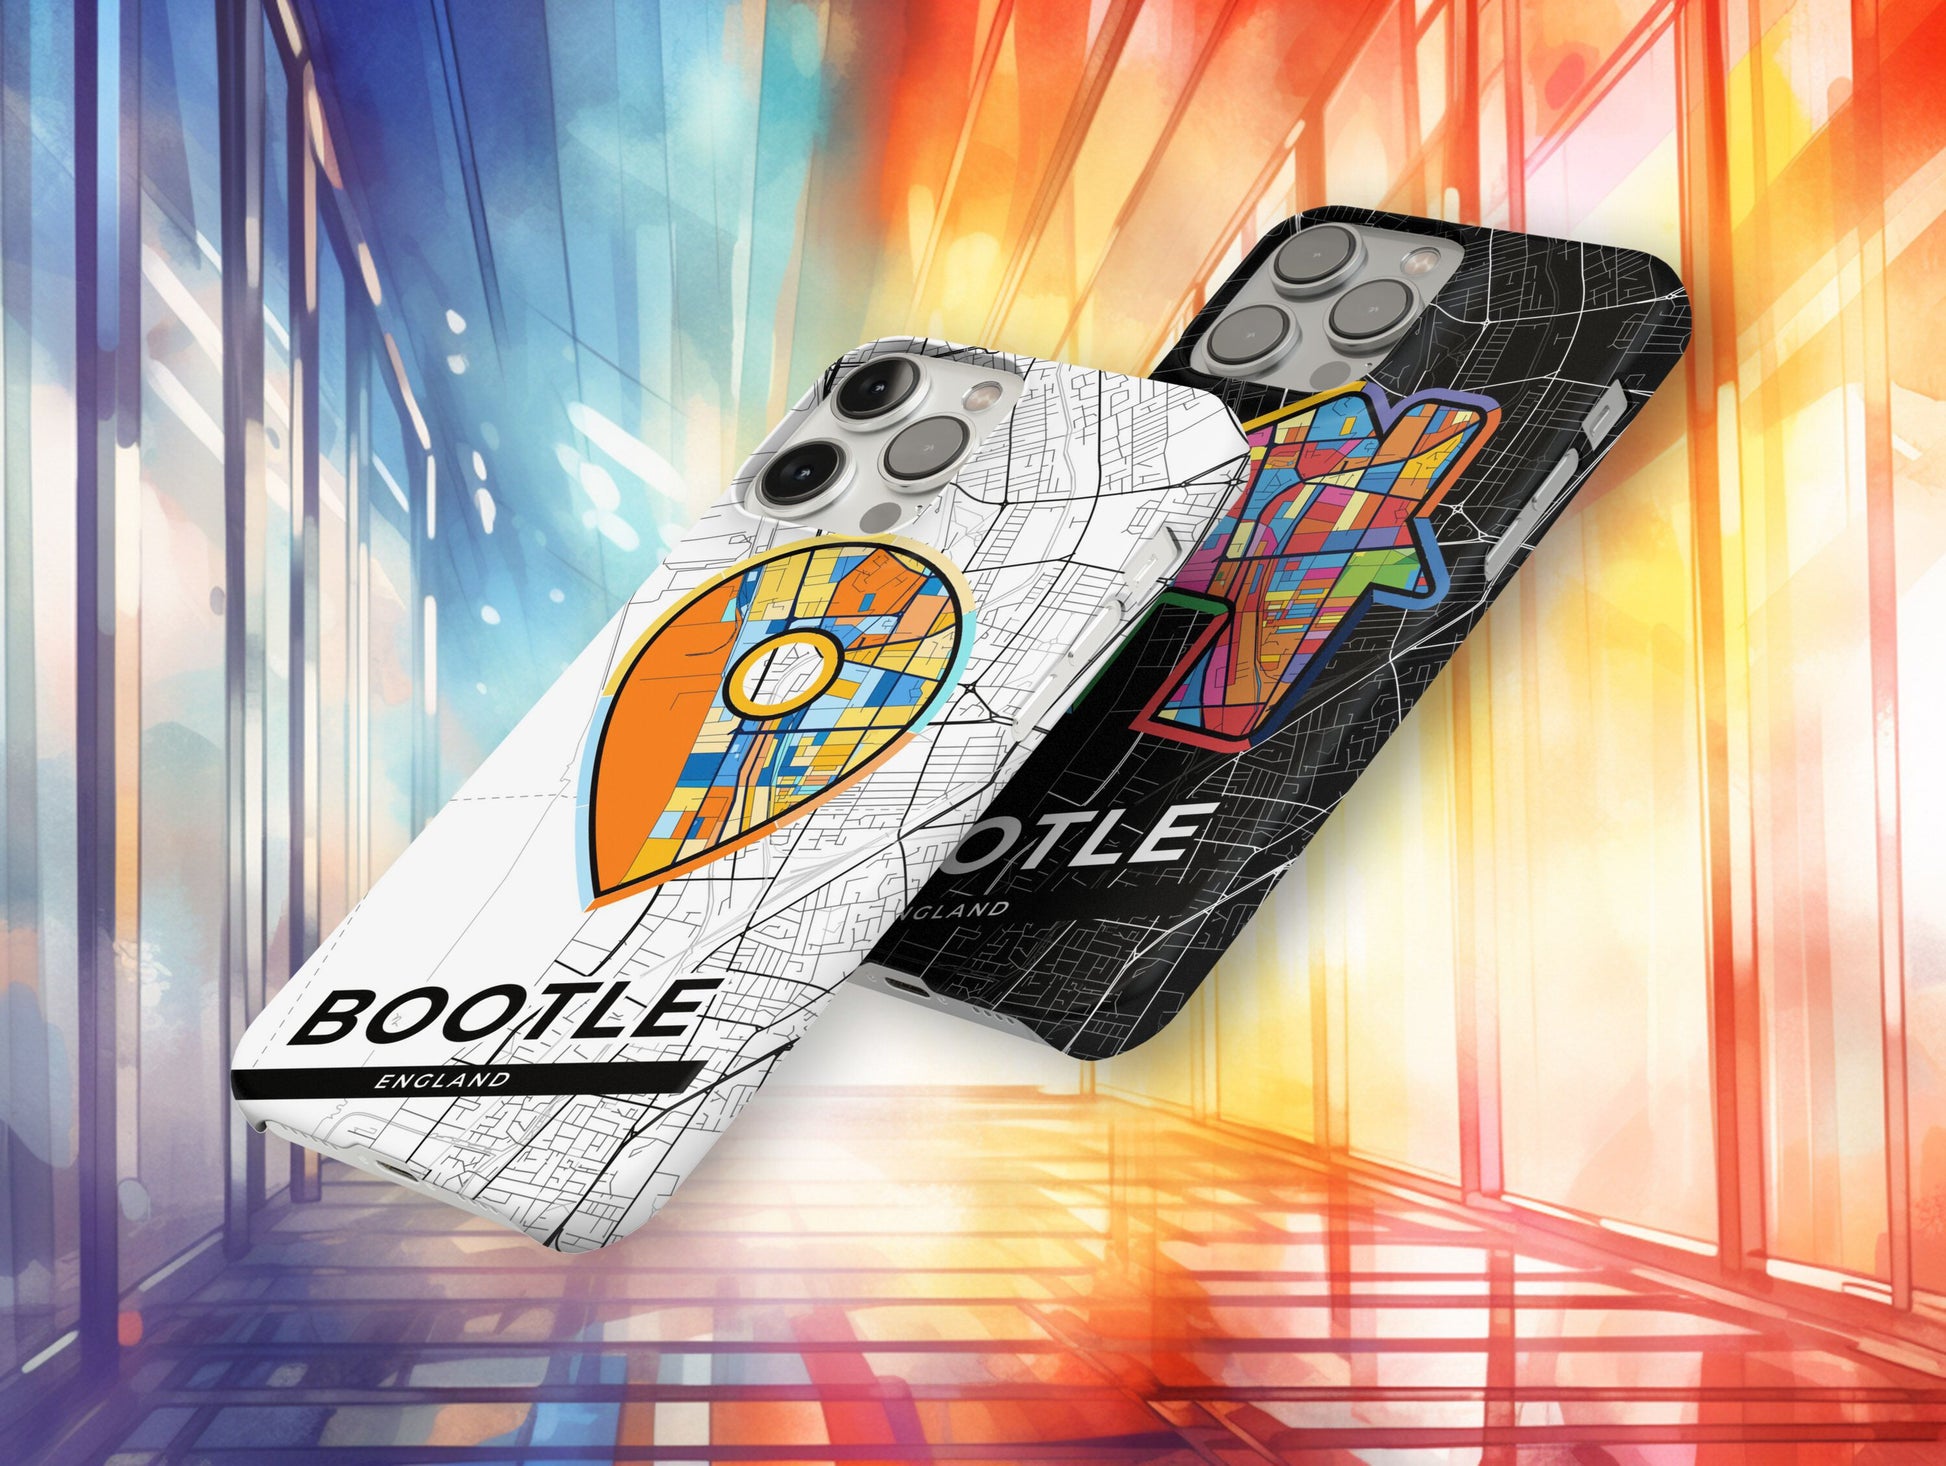 Bootle England slim phone case with colorful icon. Birthday, wedding or housewarming gift. Couple match cases.